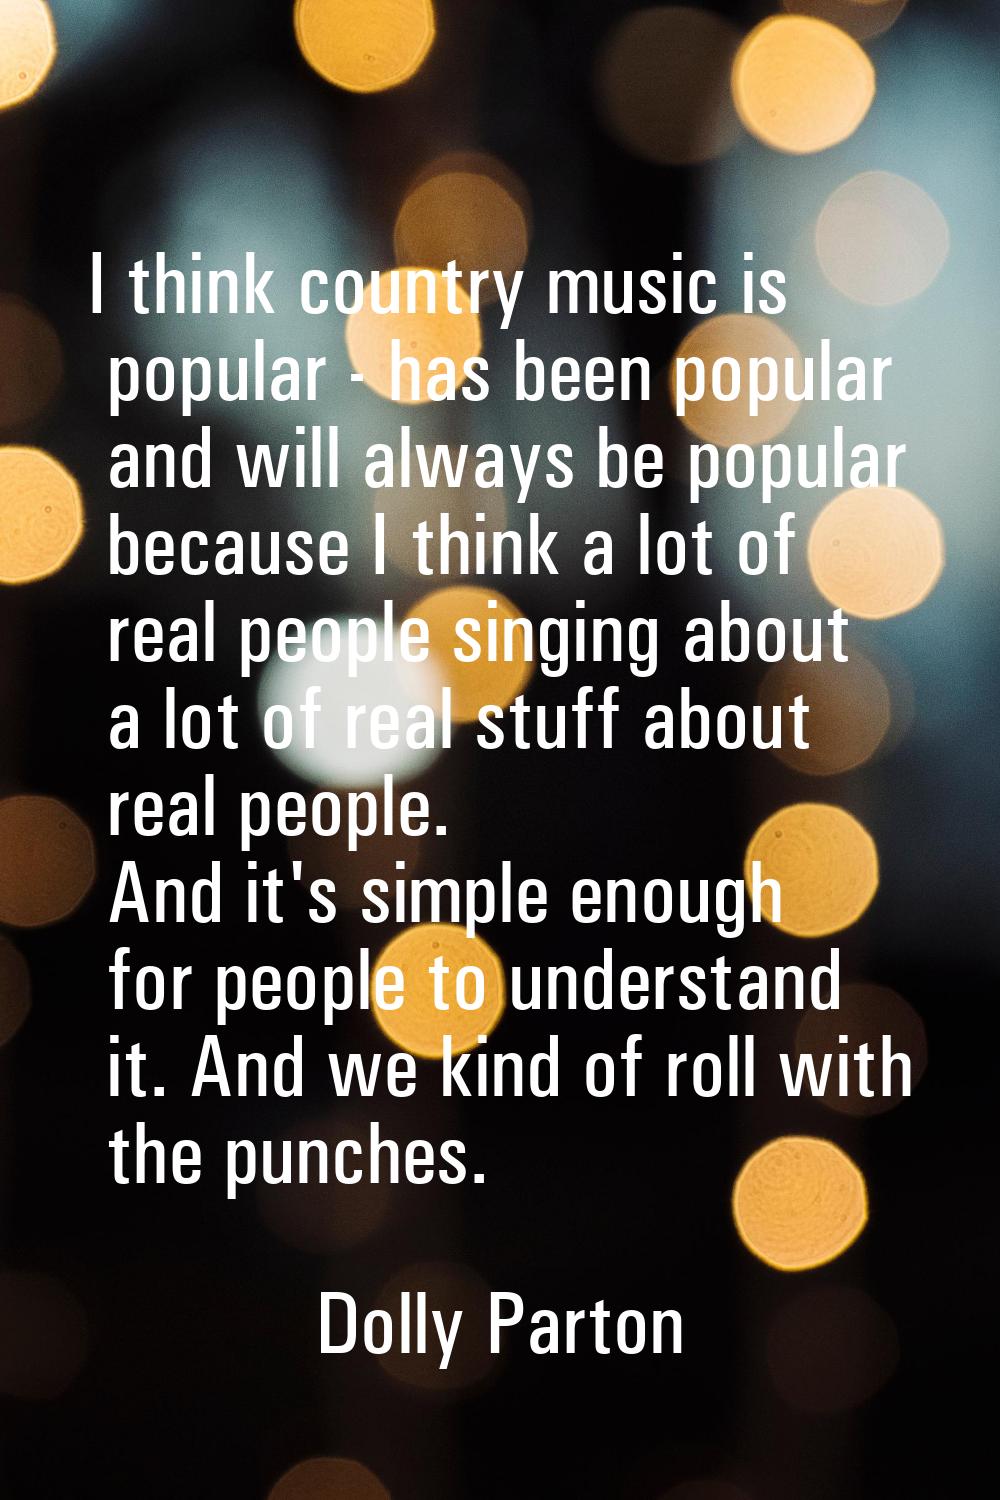 I think country music is popular - has been popular and will always be popular because I think a lo